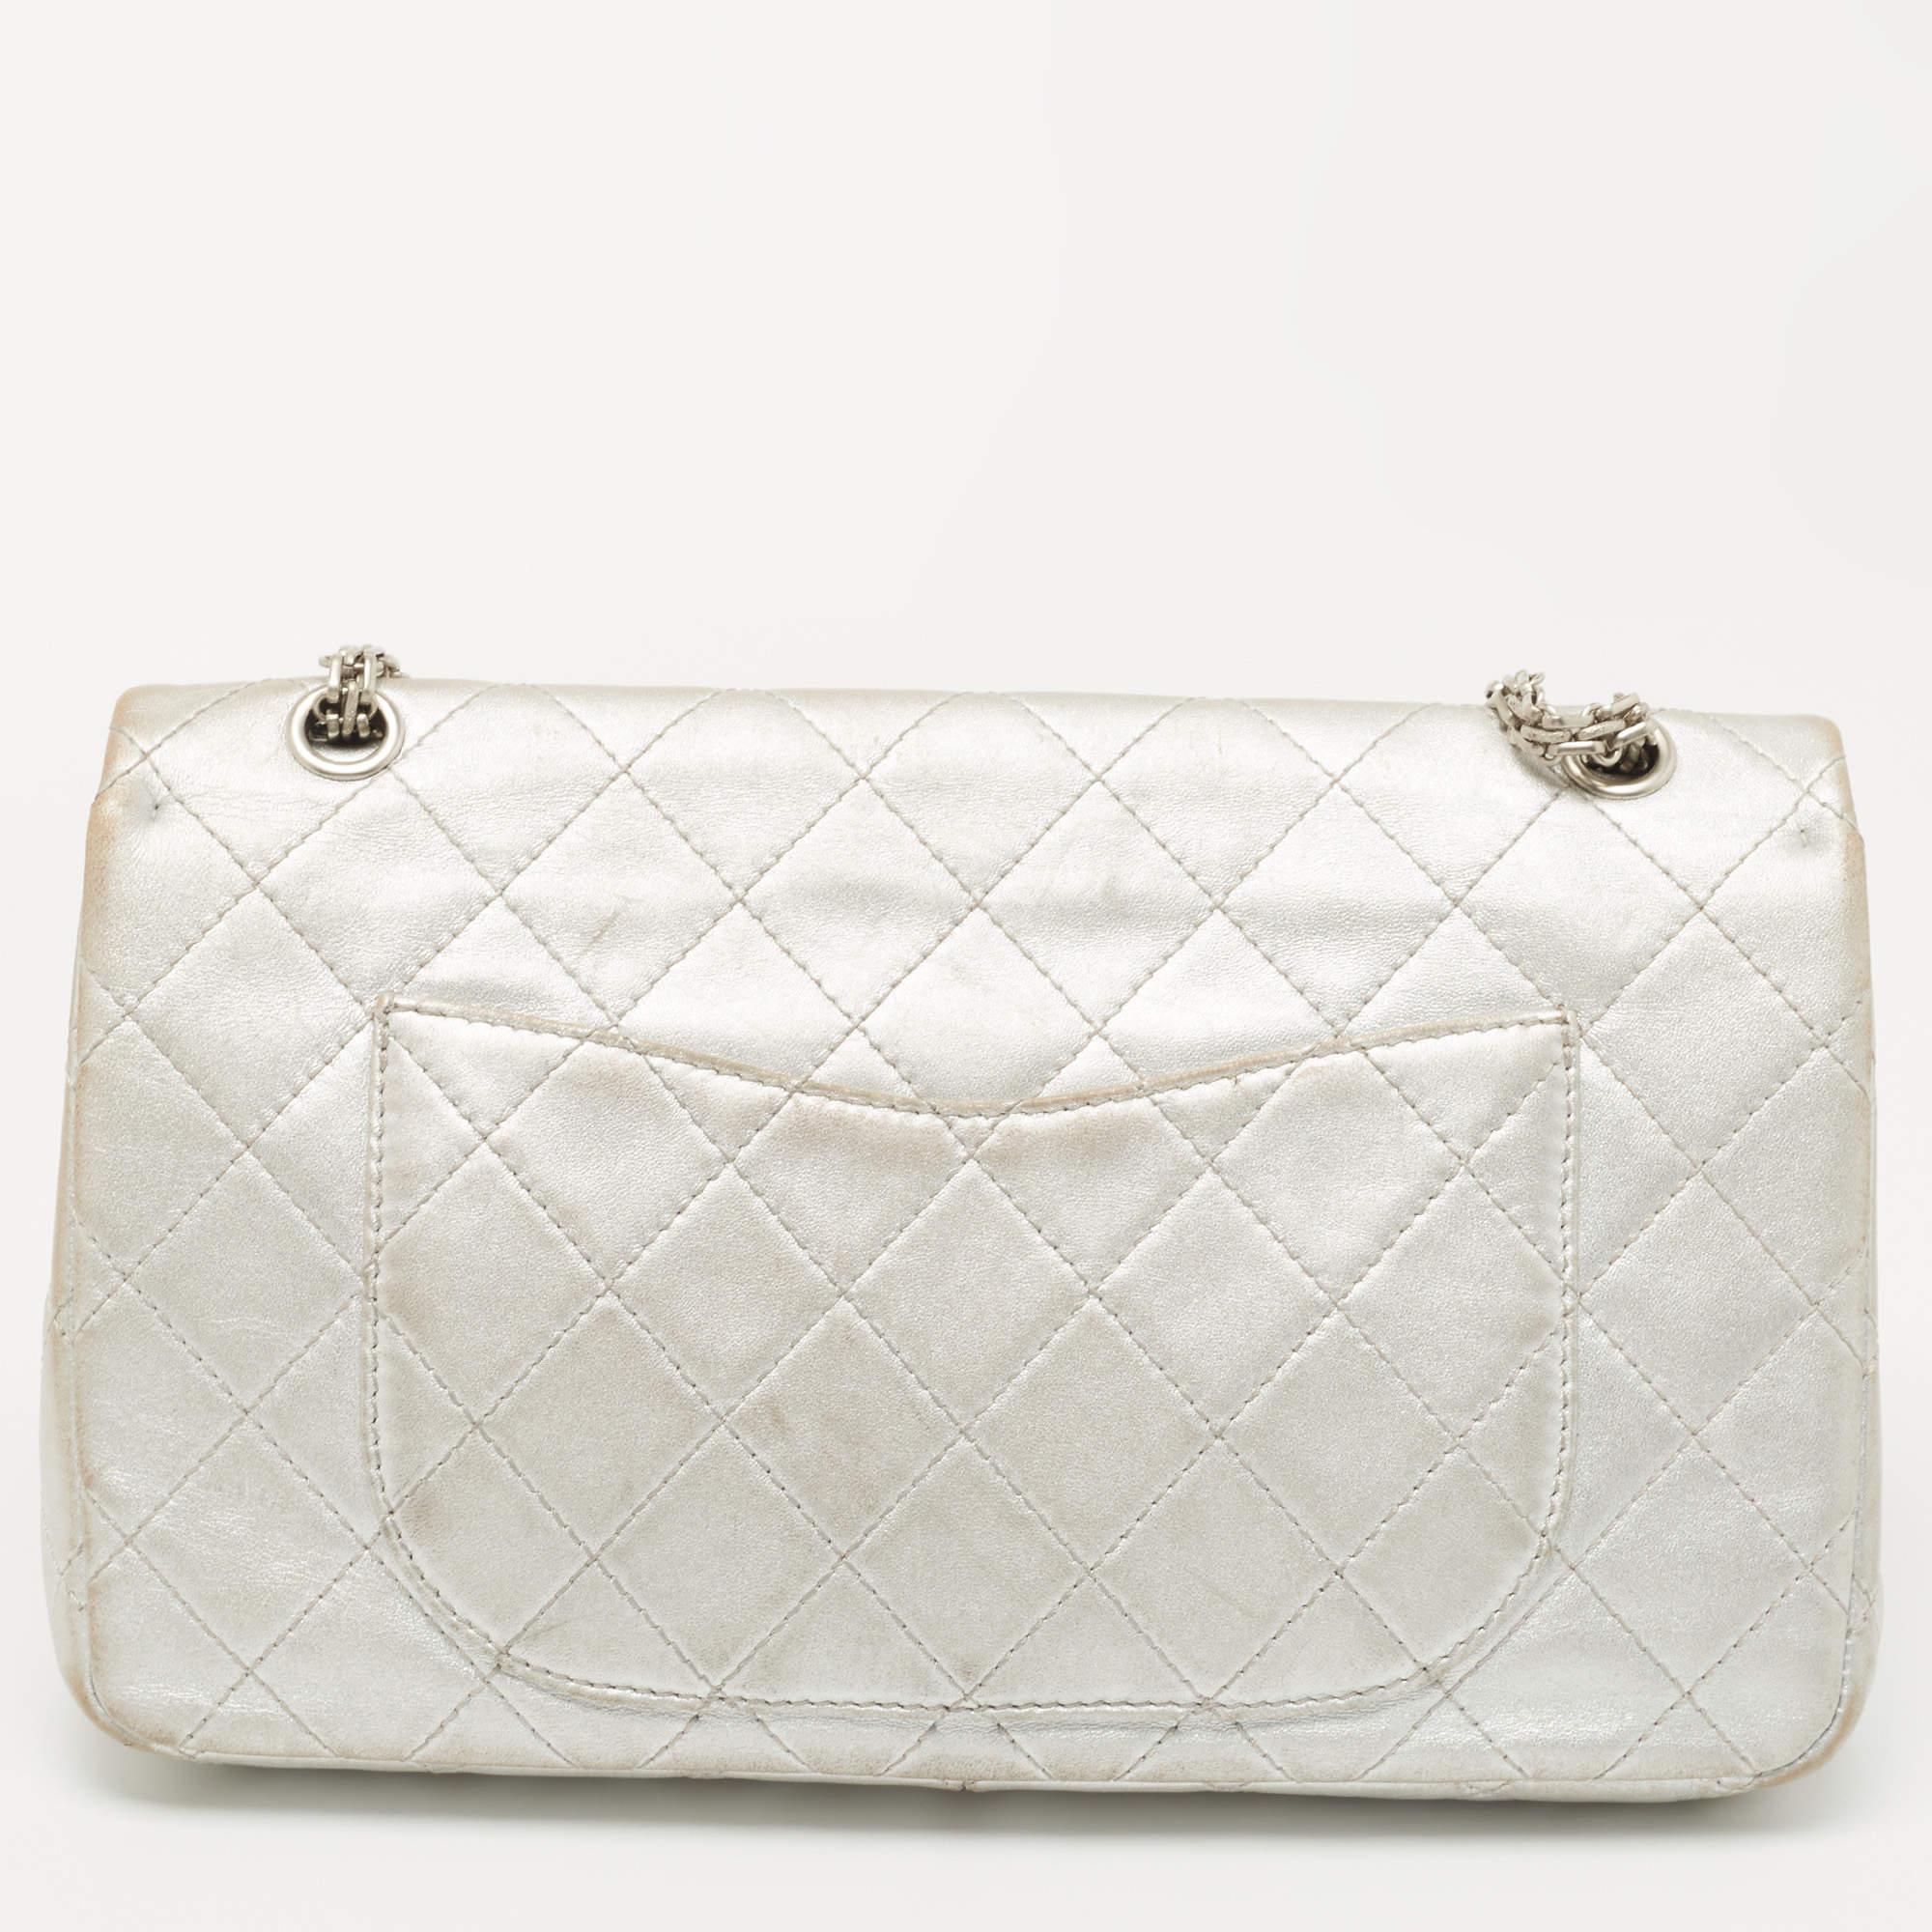 Chanel Silver Quilted Leather Reissue 2.55 Classic 227 Flap Bag 8